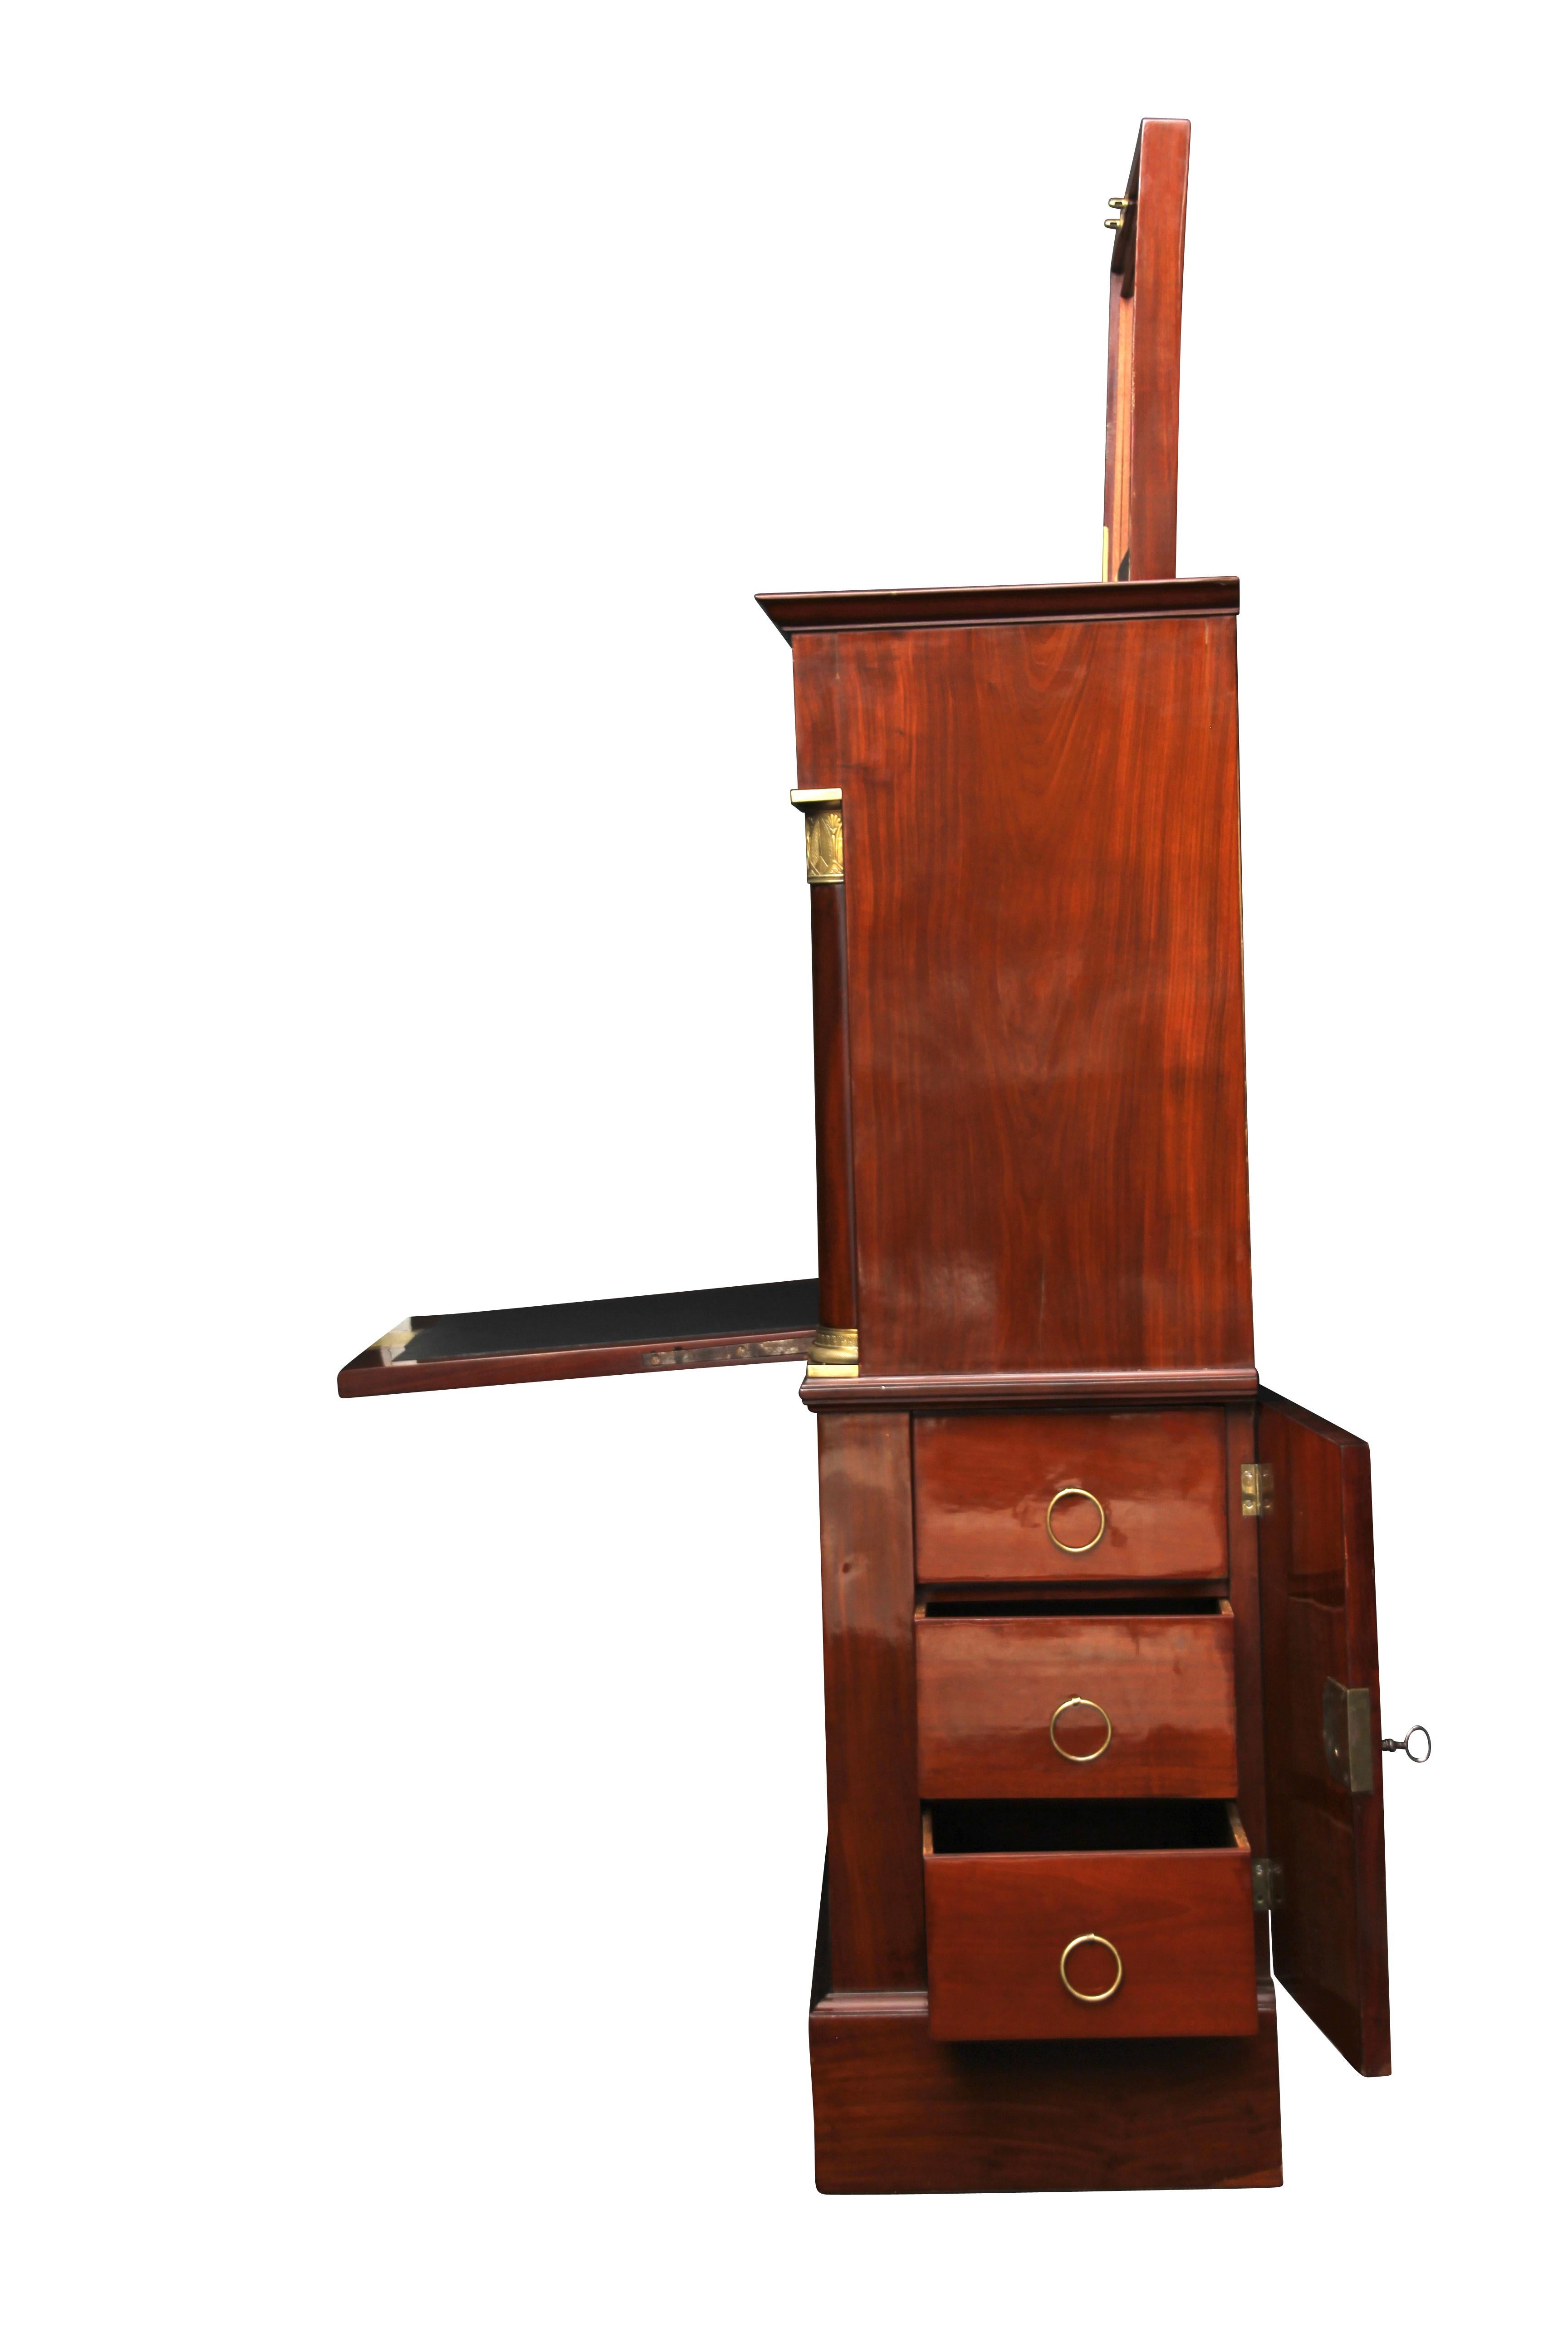 Early 19th Century Rare Empire Secretaire with Side Drawers, Mahogany, Bronzes, France circa 1810.